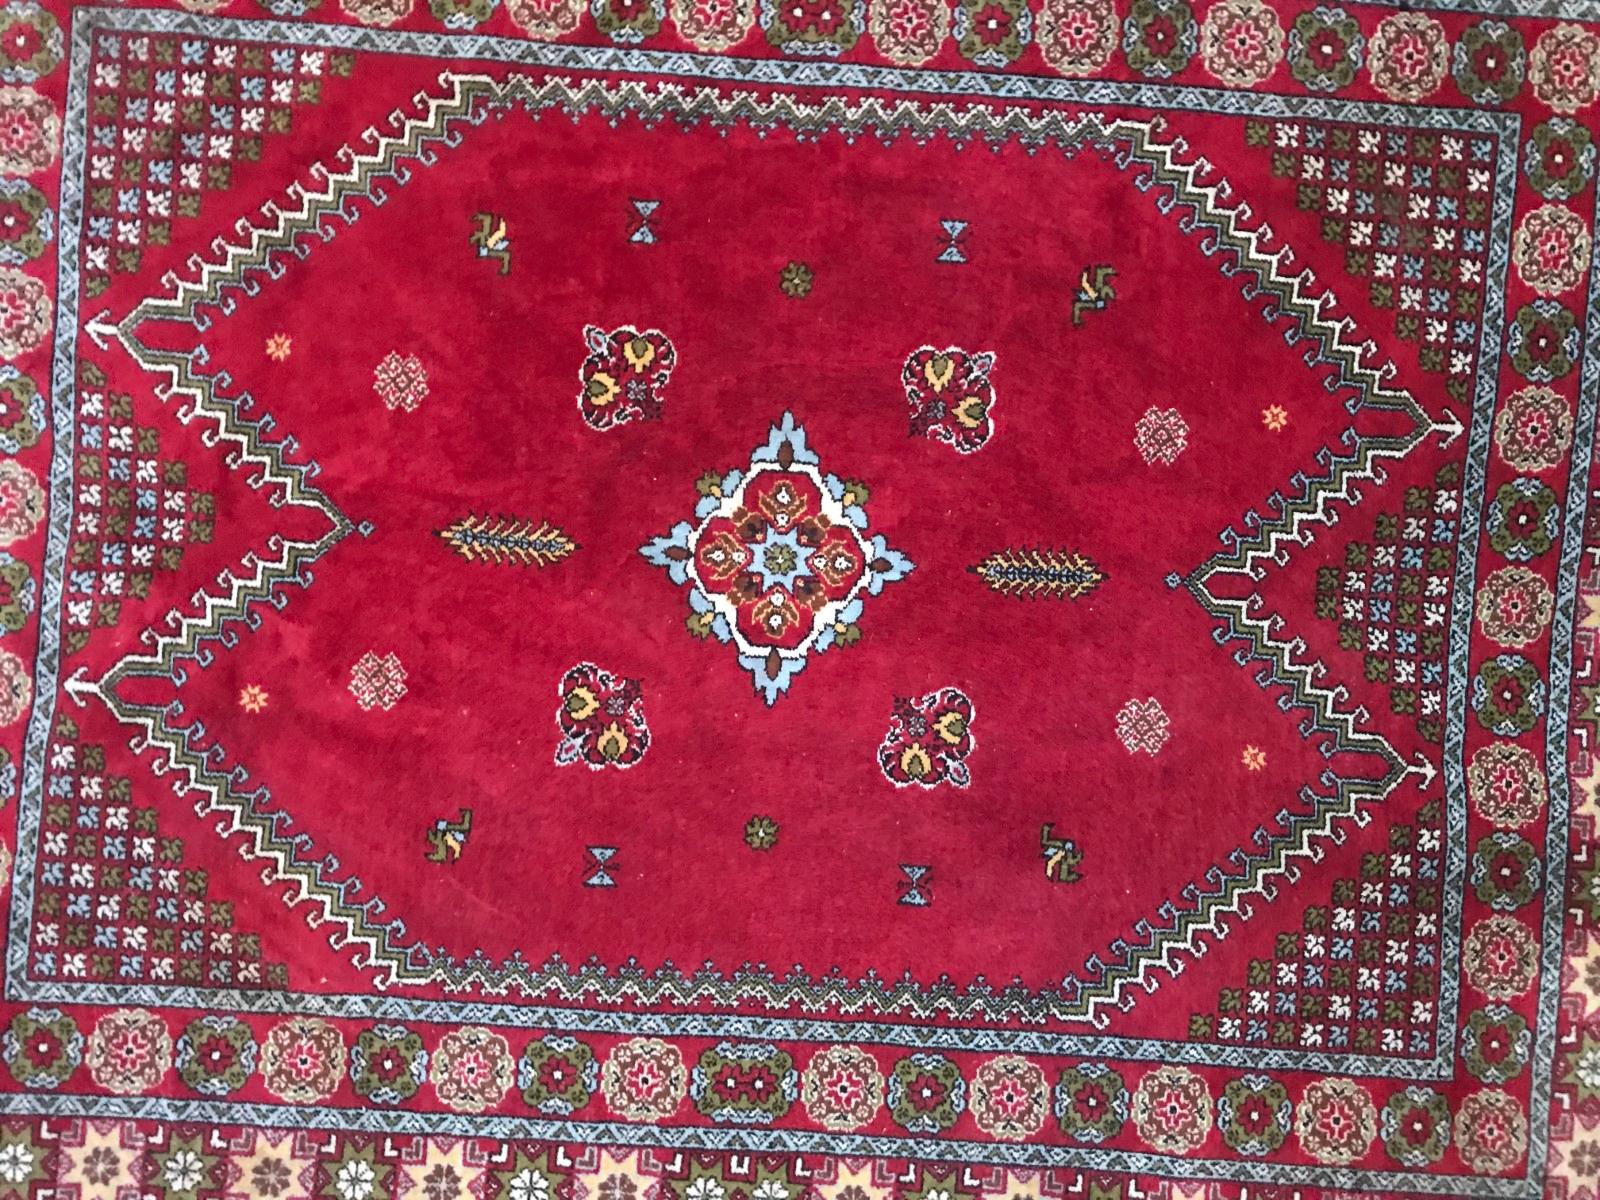 Nice 20th century Moroccan rug with beautiful geometrical design and red field color with blue and green, entirely hand knotted with wool velvet on wool foundation.

✨✨✨
